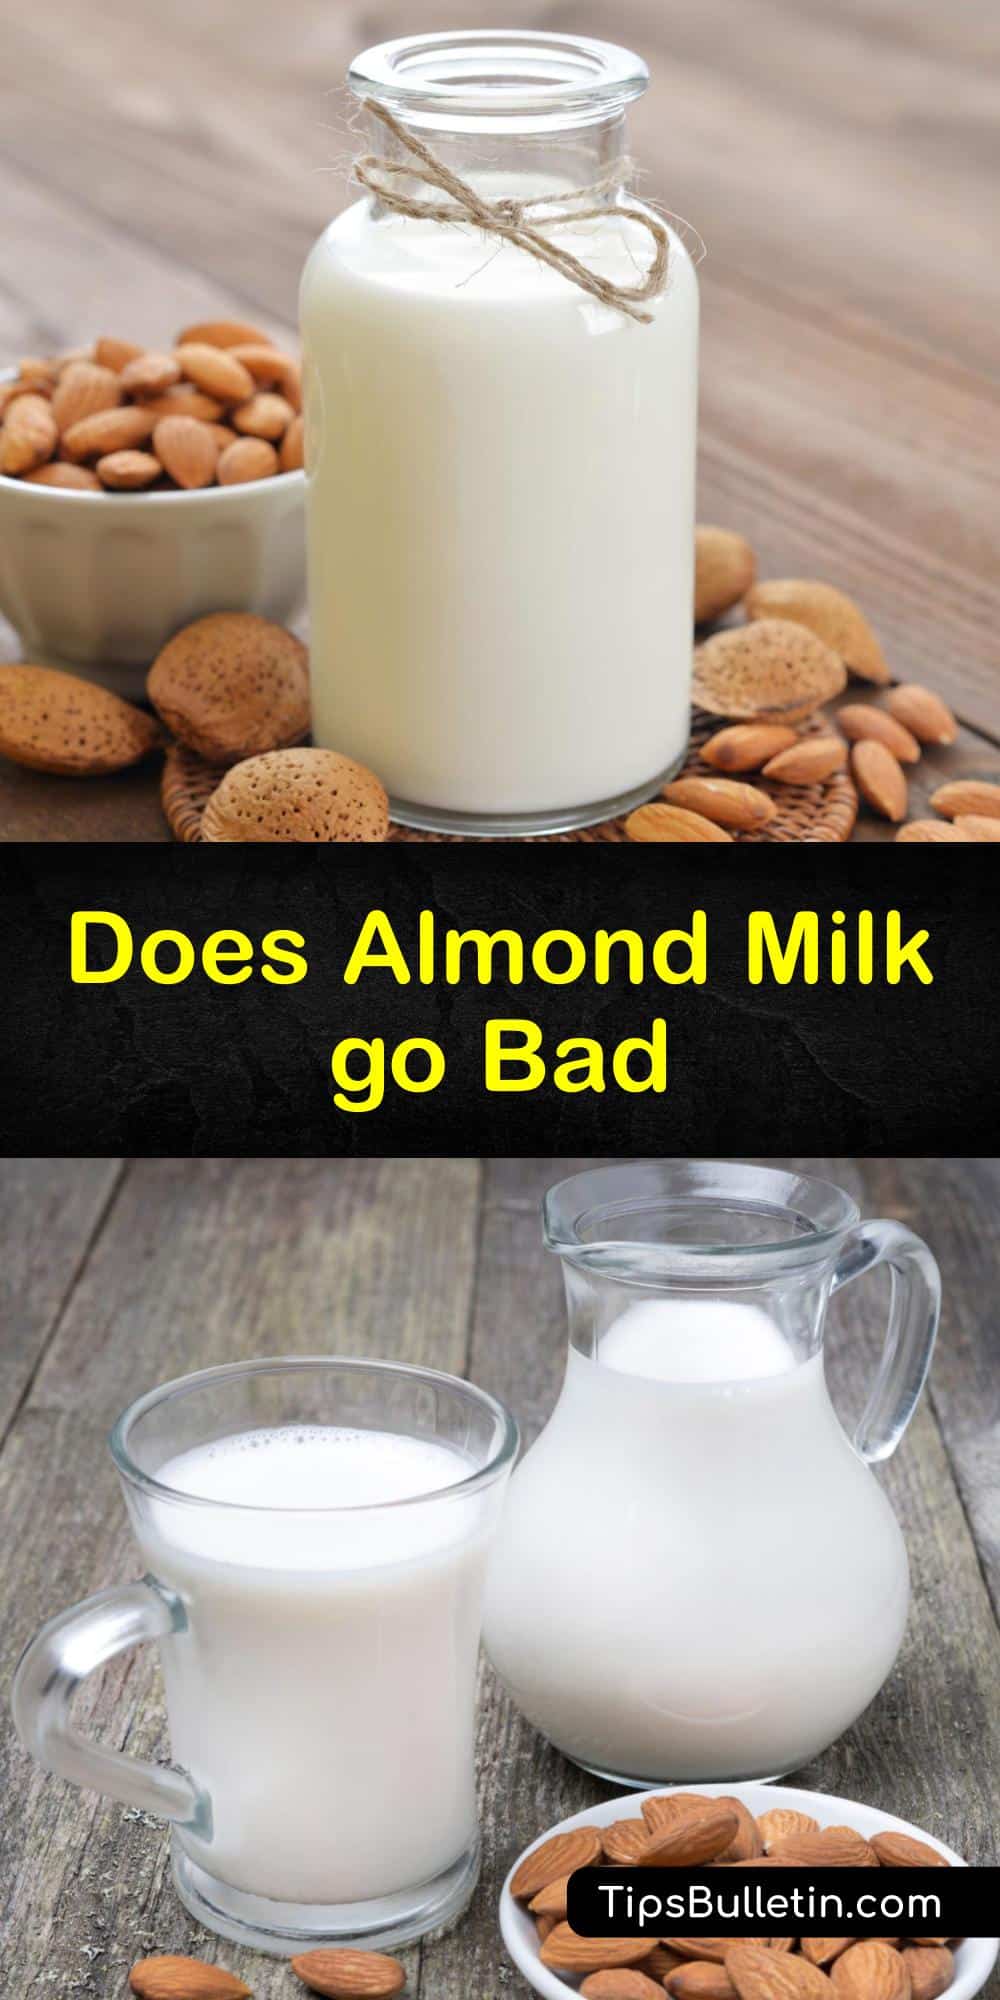 How to Tell if Your Almond Milk is Bad